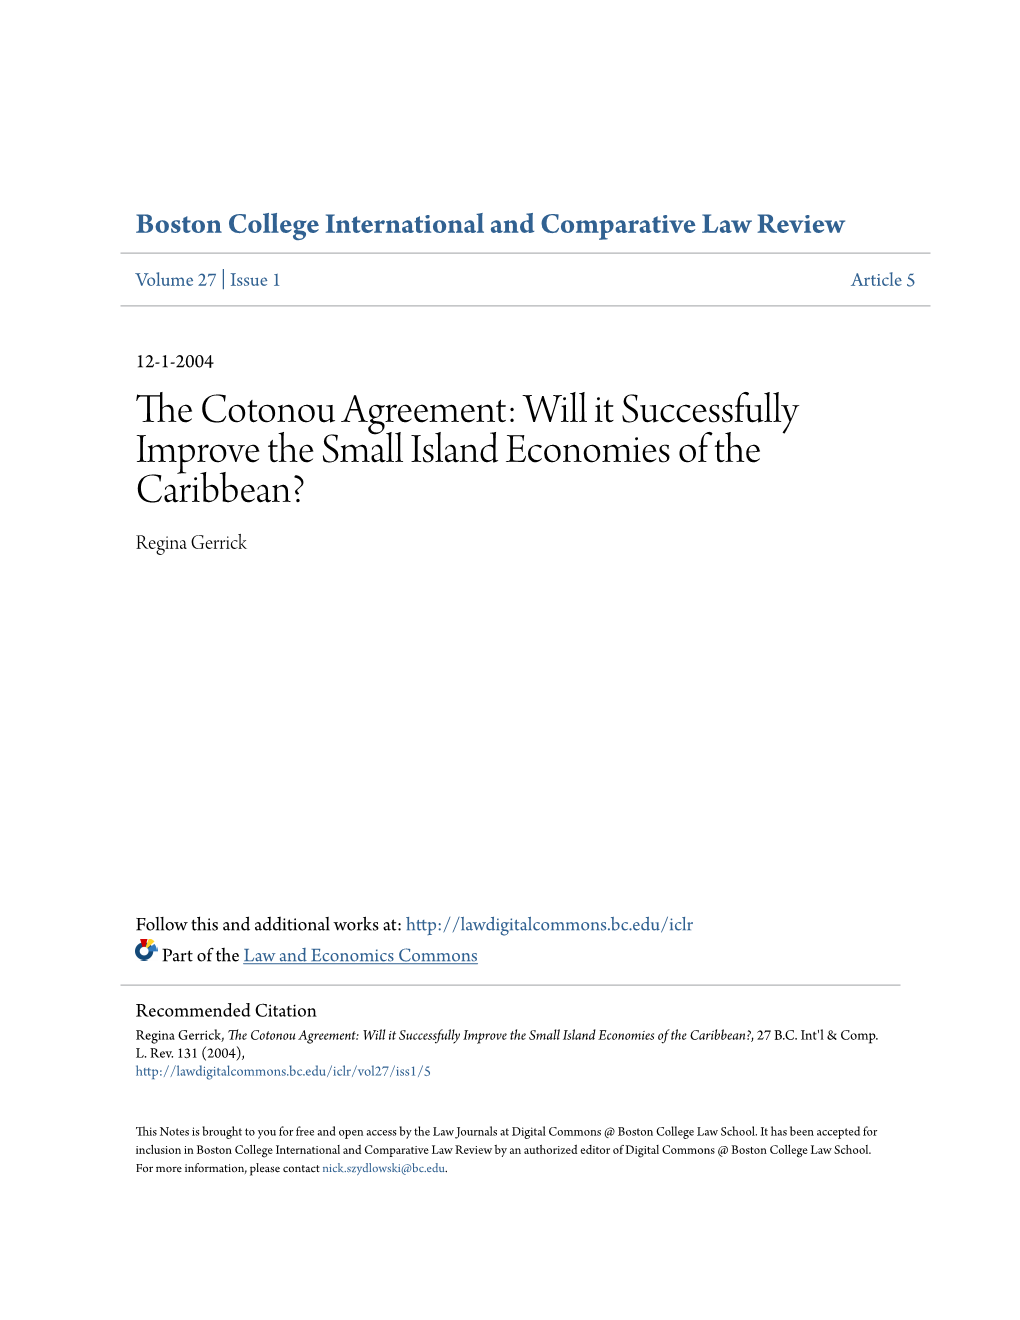 The Cotonou Agreement: Will It Successfully Improve the Small Island Economies of the Caribbean?, 27 B.C